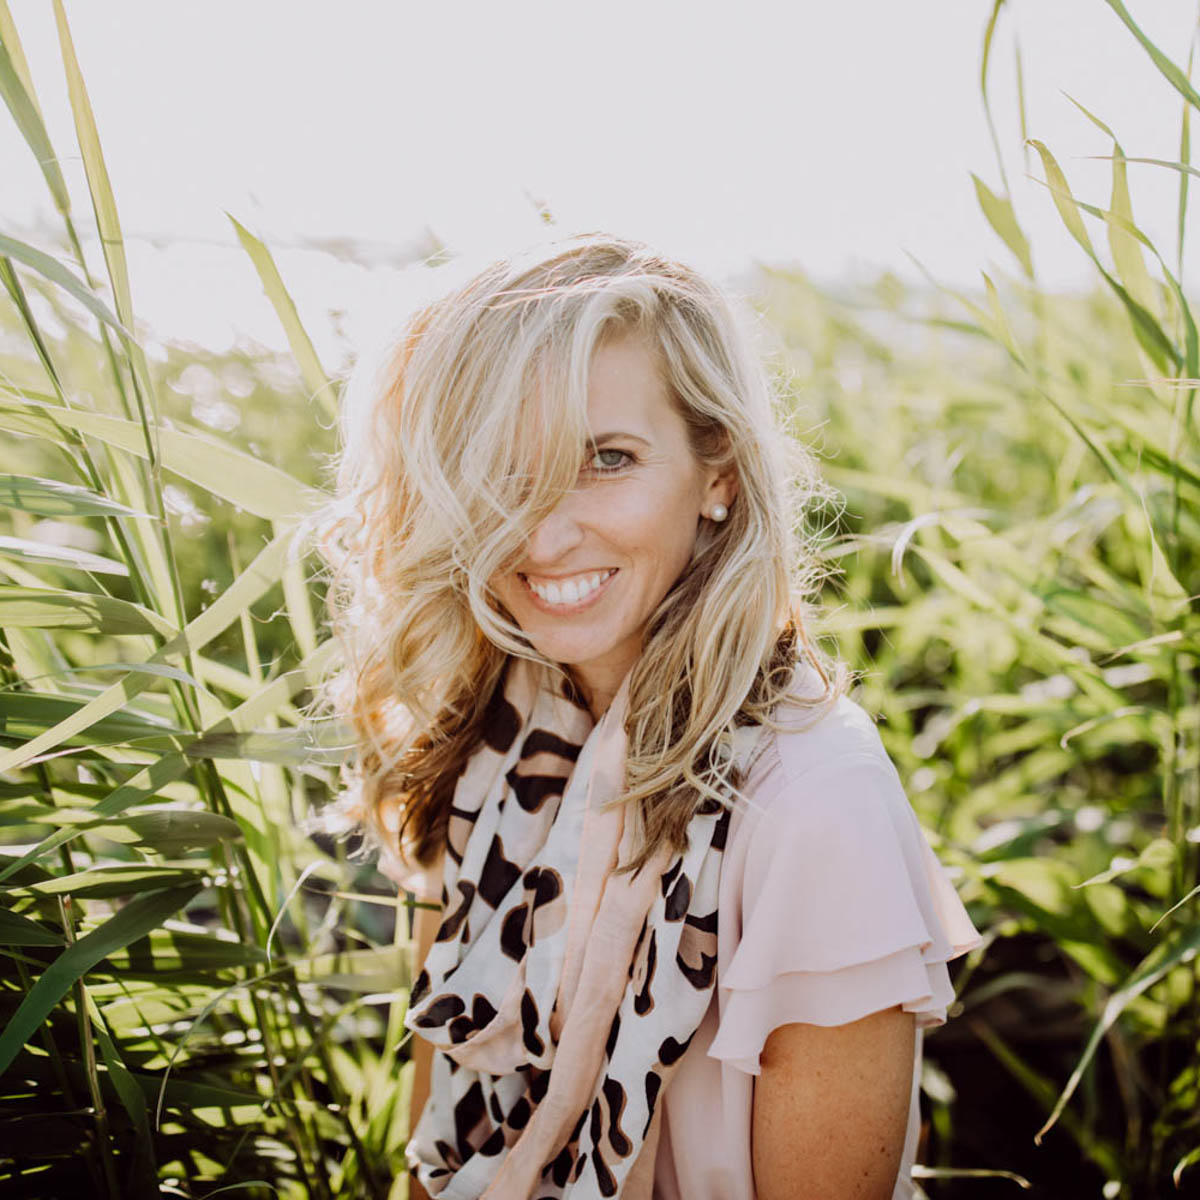 Lifestyle portrait photo, radiant smiling woman with blonde curls in the reeds on the lakeshore :: photo copyright Karin Bergmann